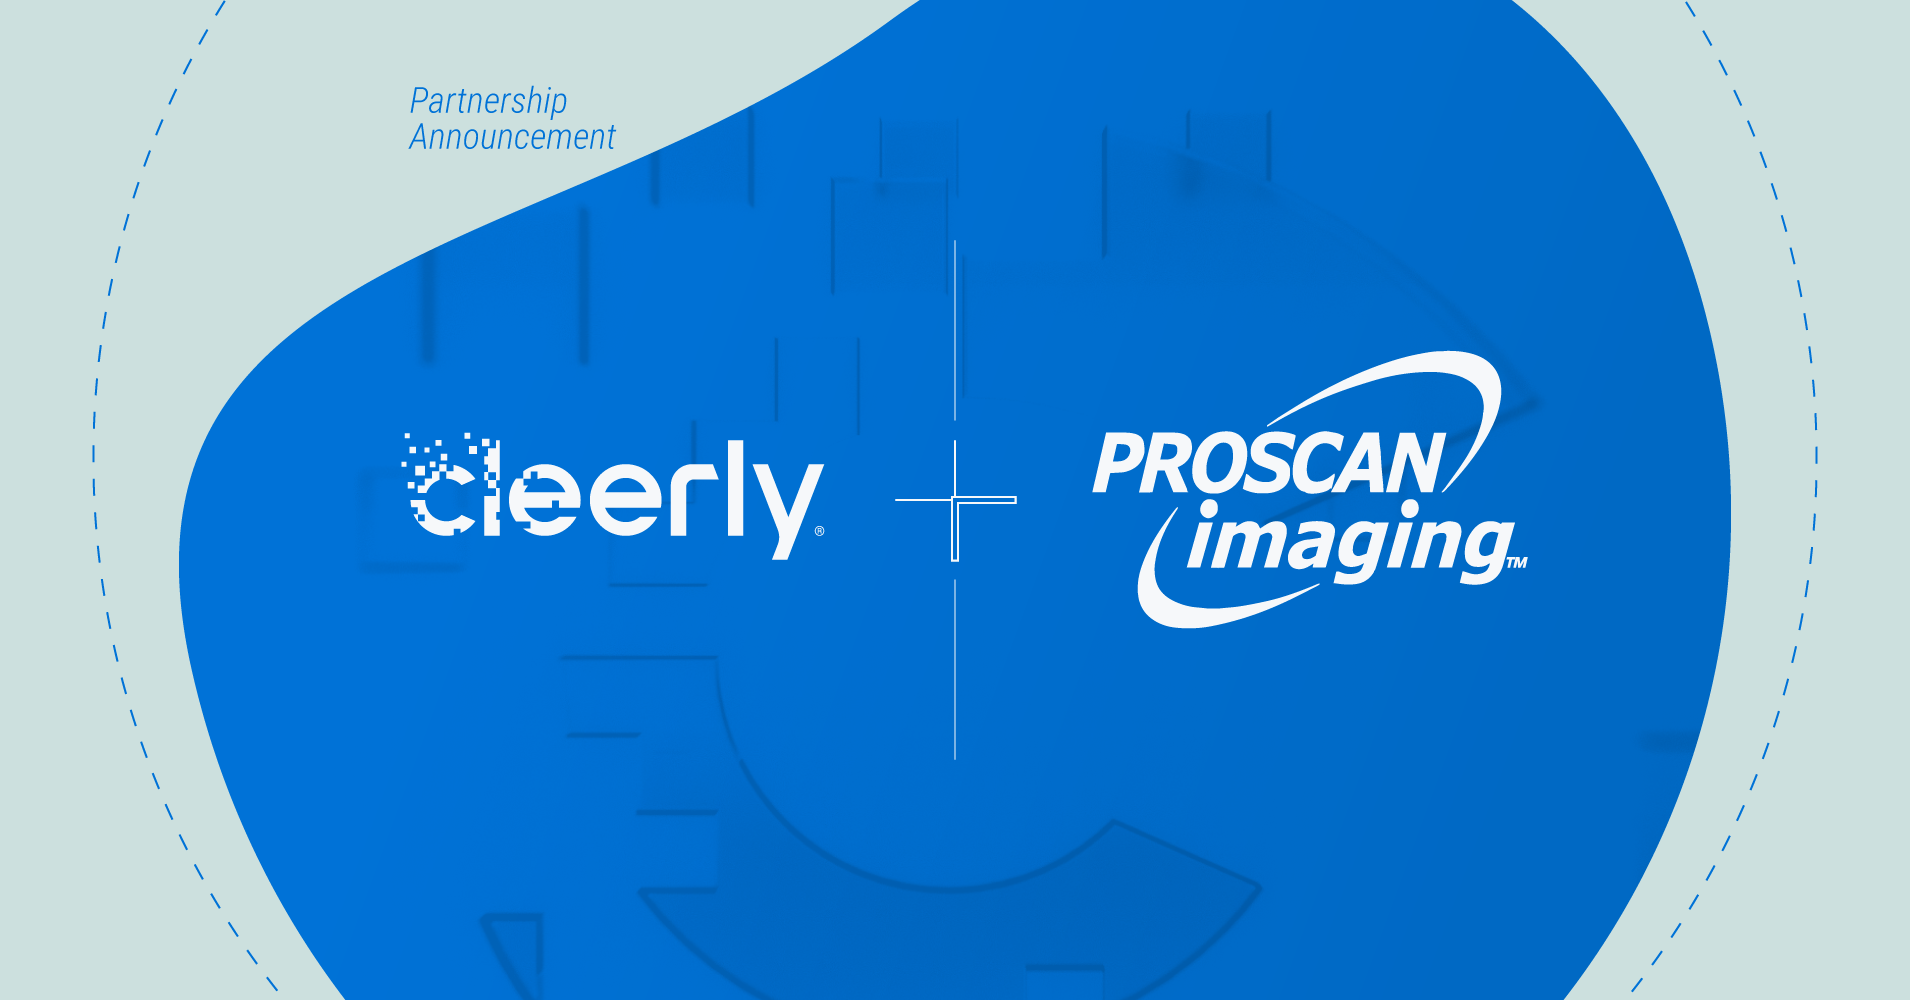 Partnership announcement: Cleerly partners with ProScan Imaging